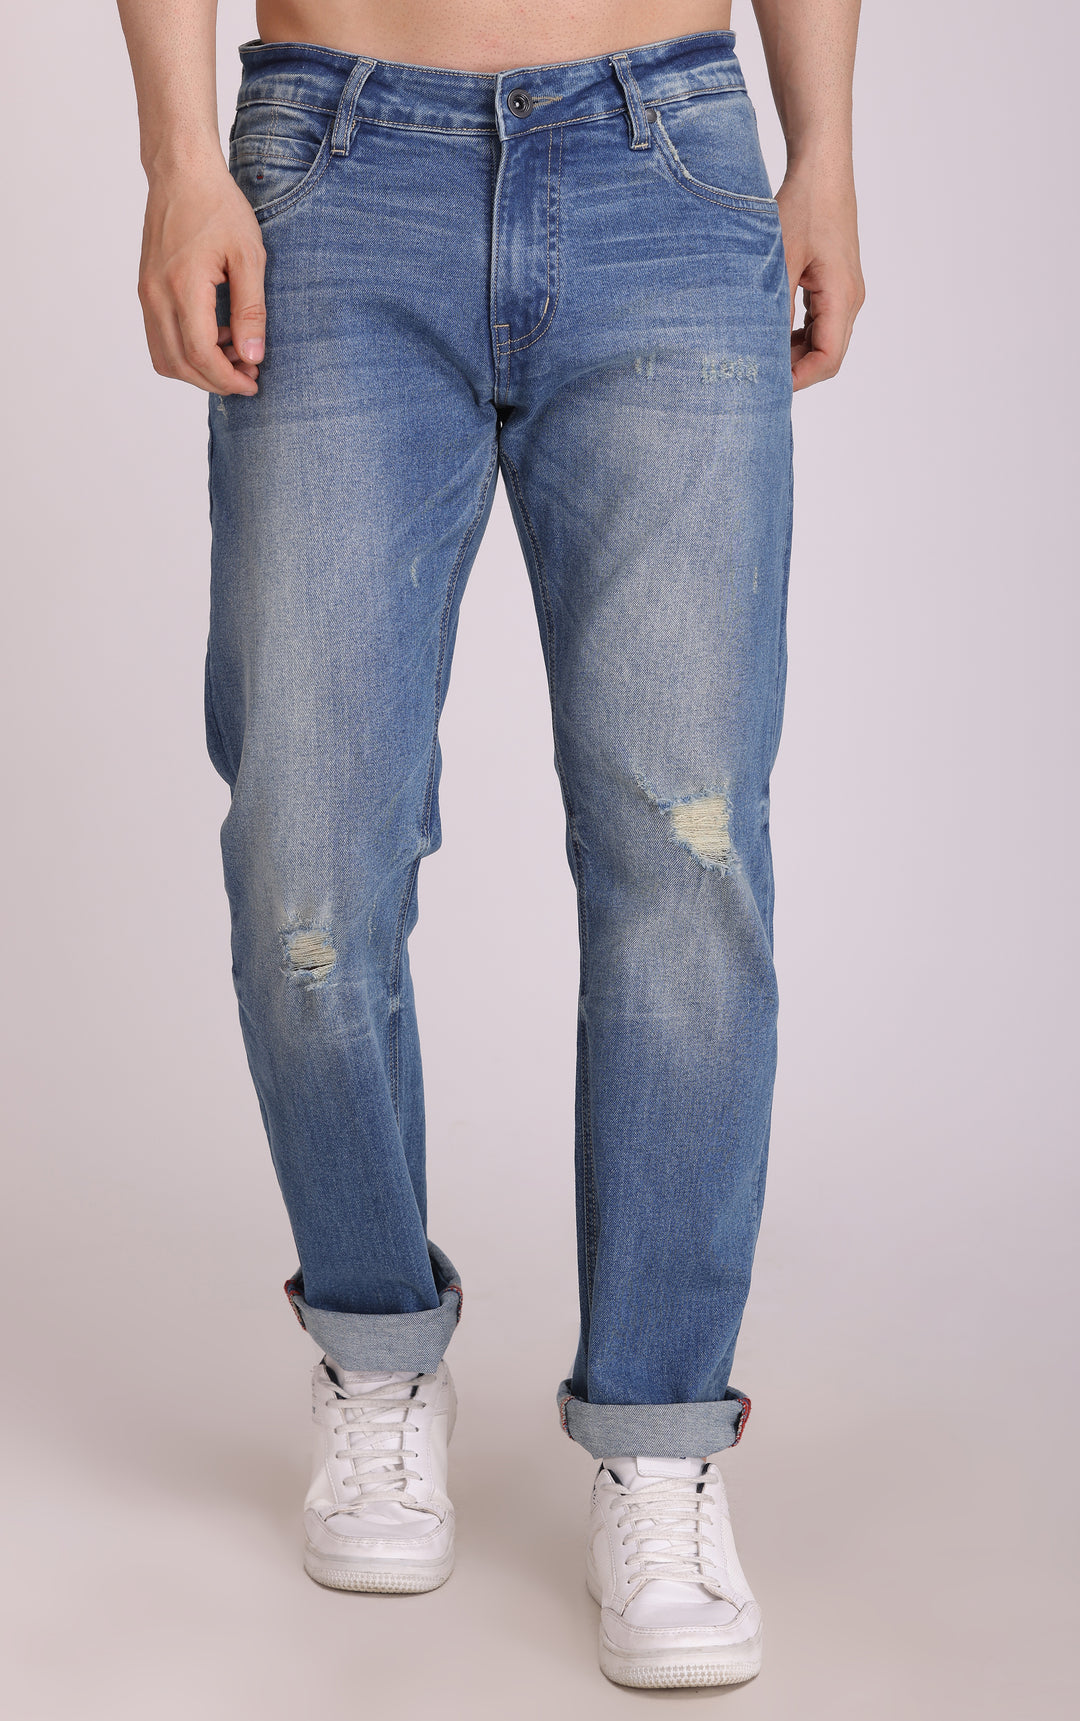 BUY ONLINE BLUE MID RISE RIPPED SLIM FIT JEANS FOR MEN